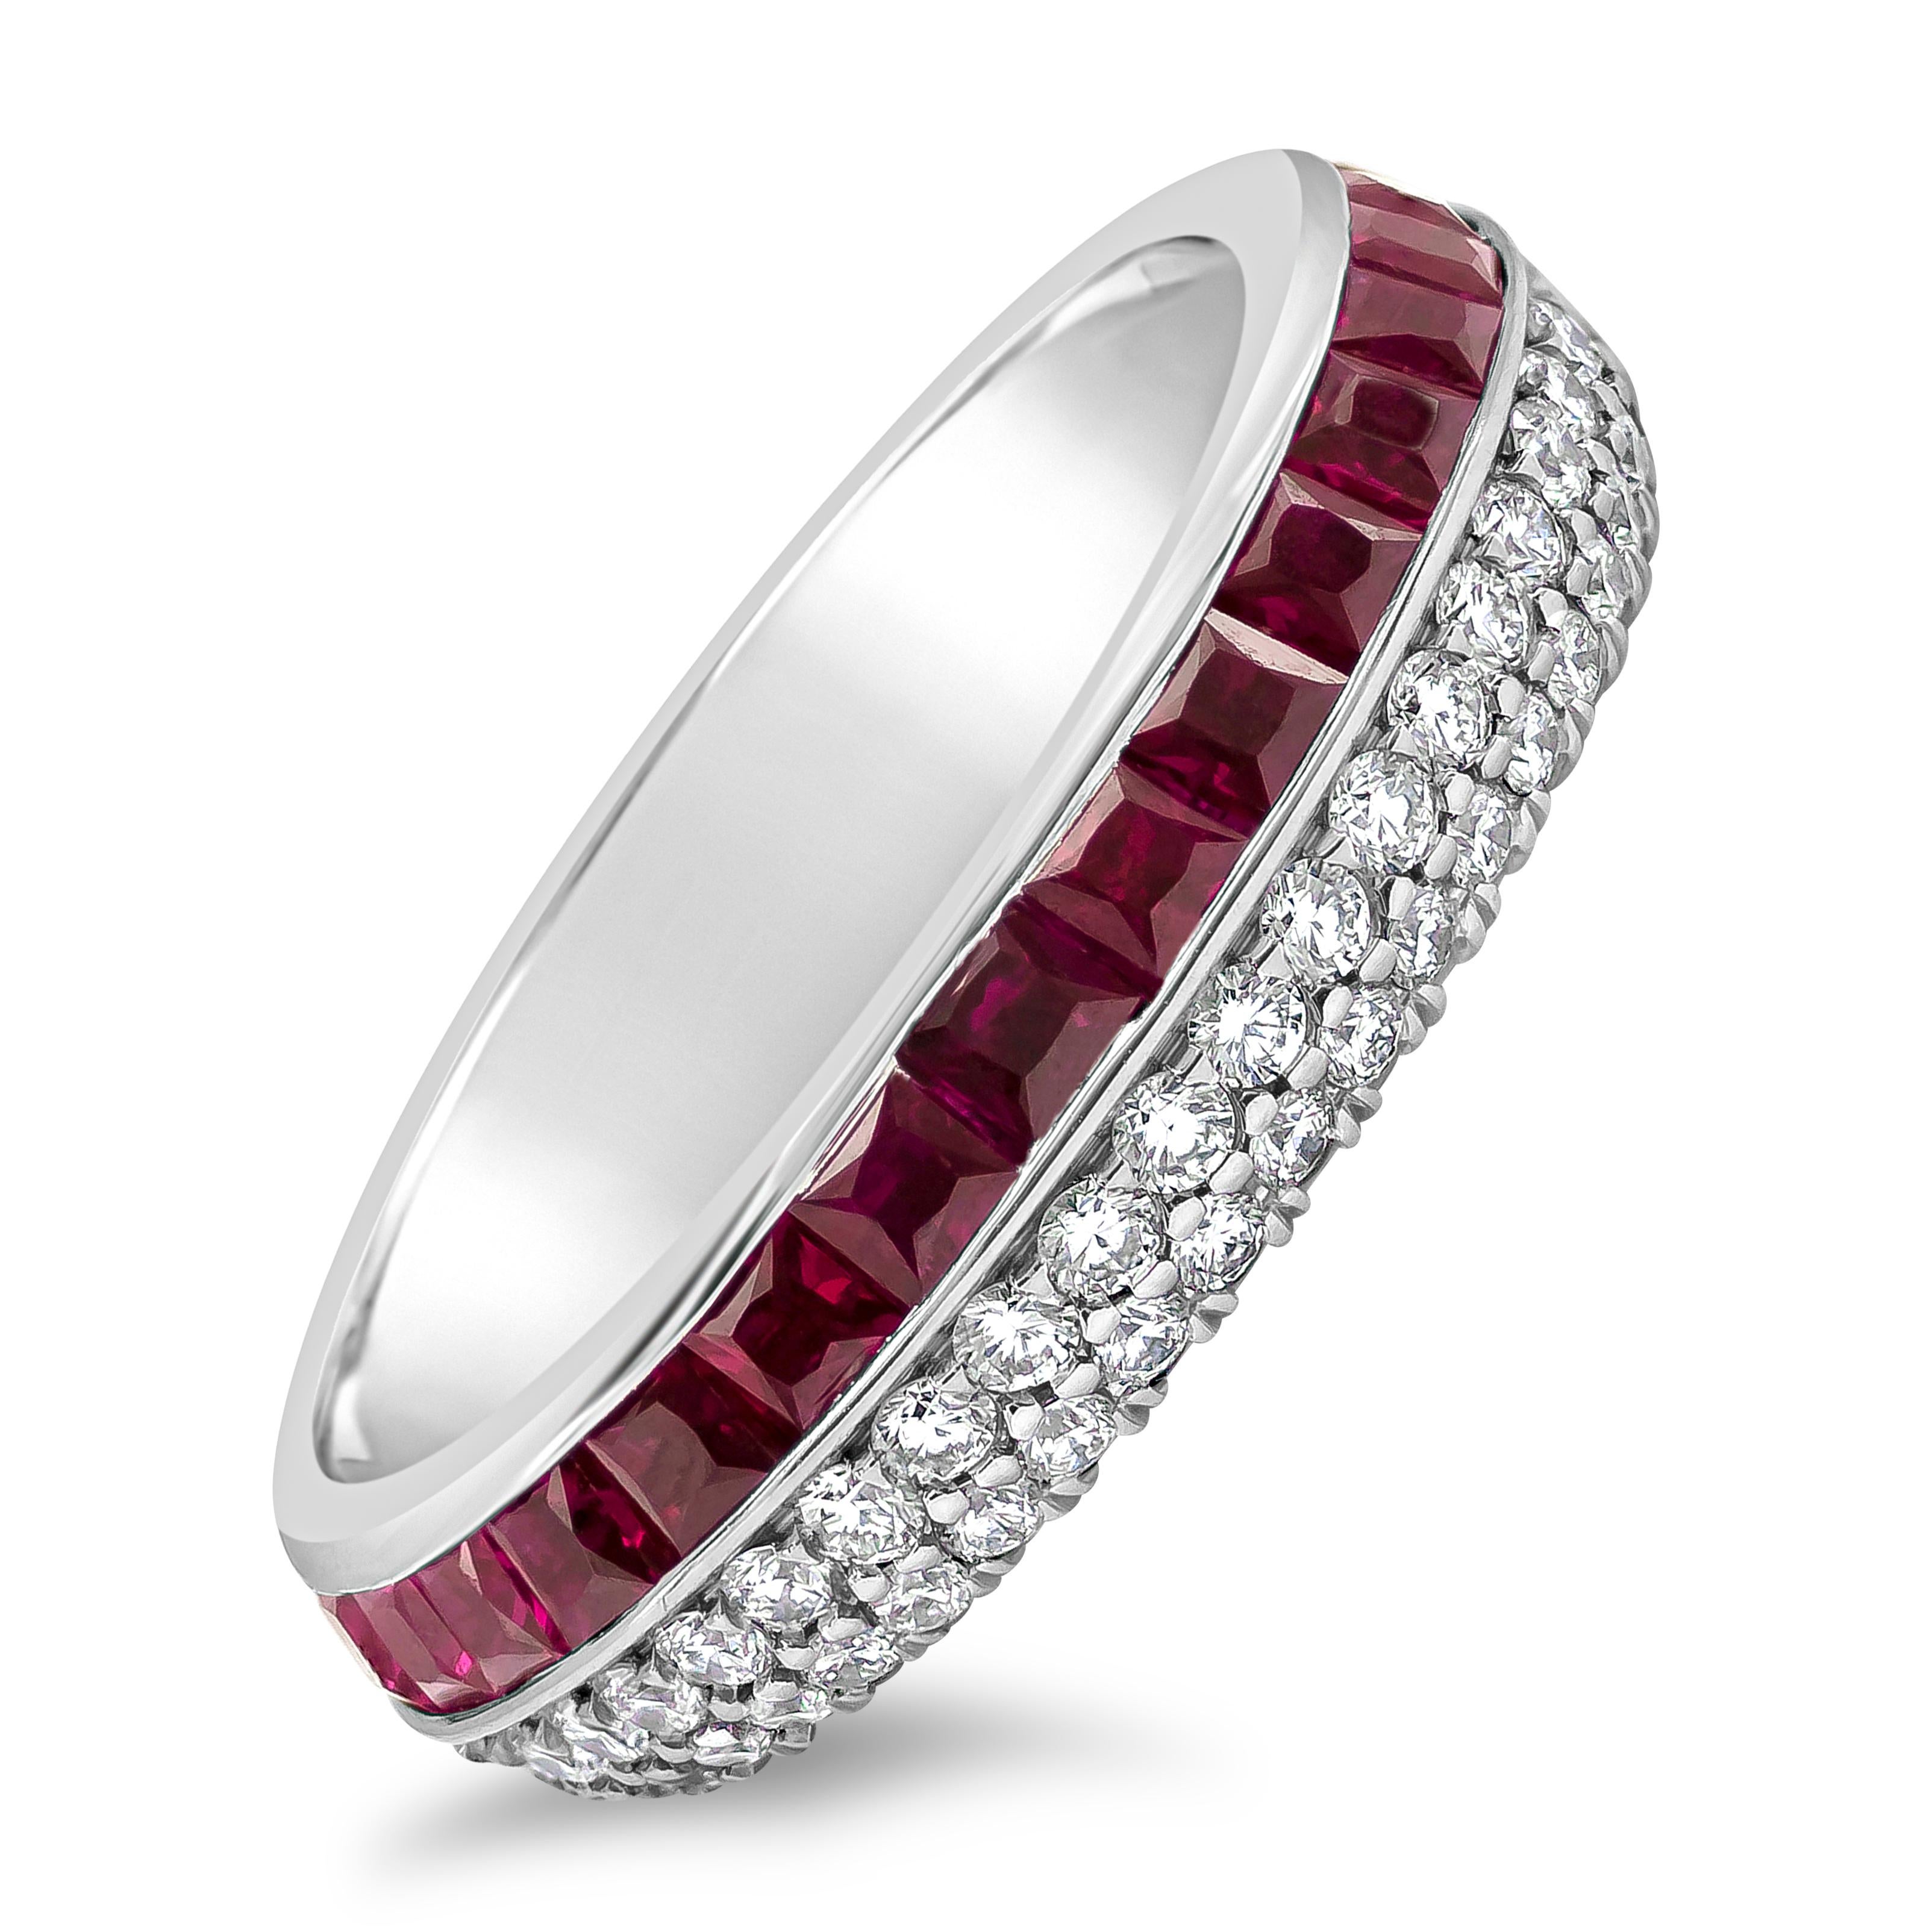 A modern and chic wedding band style featuring a row of square-cut color-rich rubies weighing 2.49 carats total and round brilliant diamonds weighing 1.10 carats total. The ring is designed to be reversible with either gemstone or diamond to